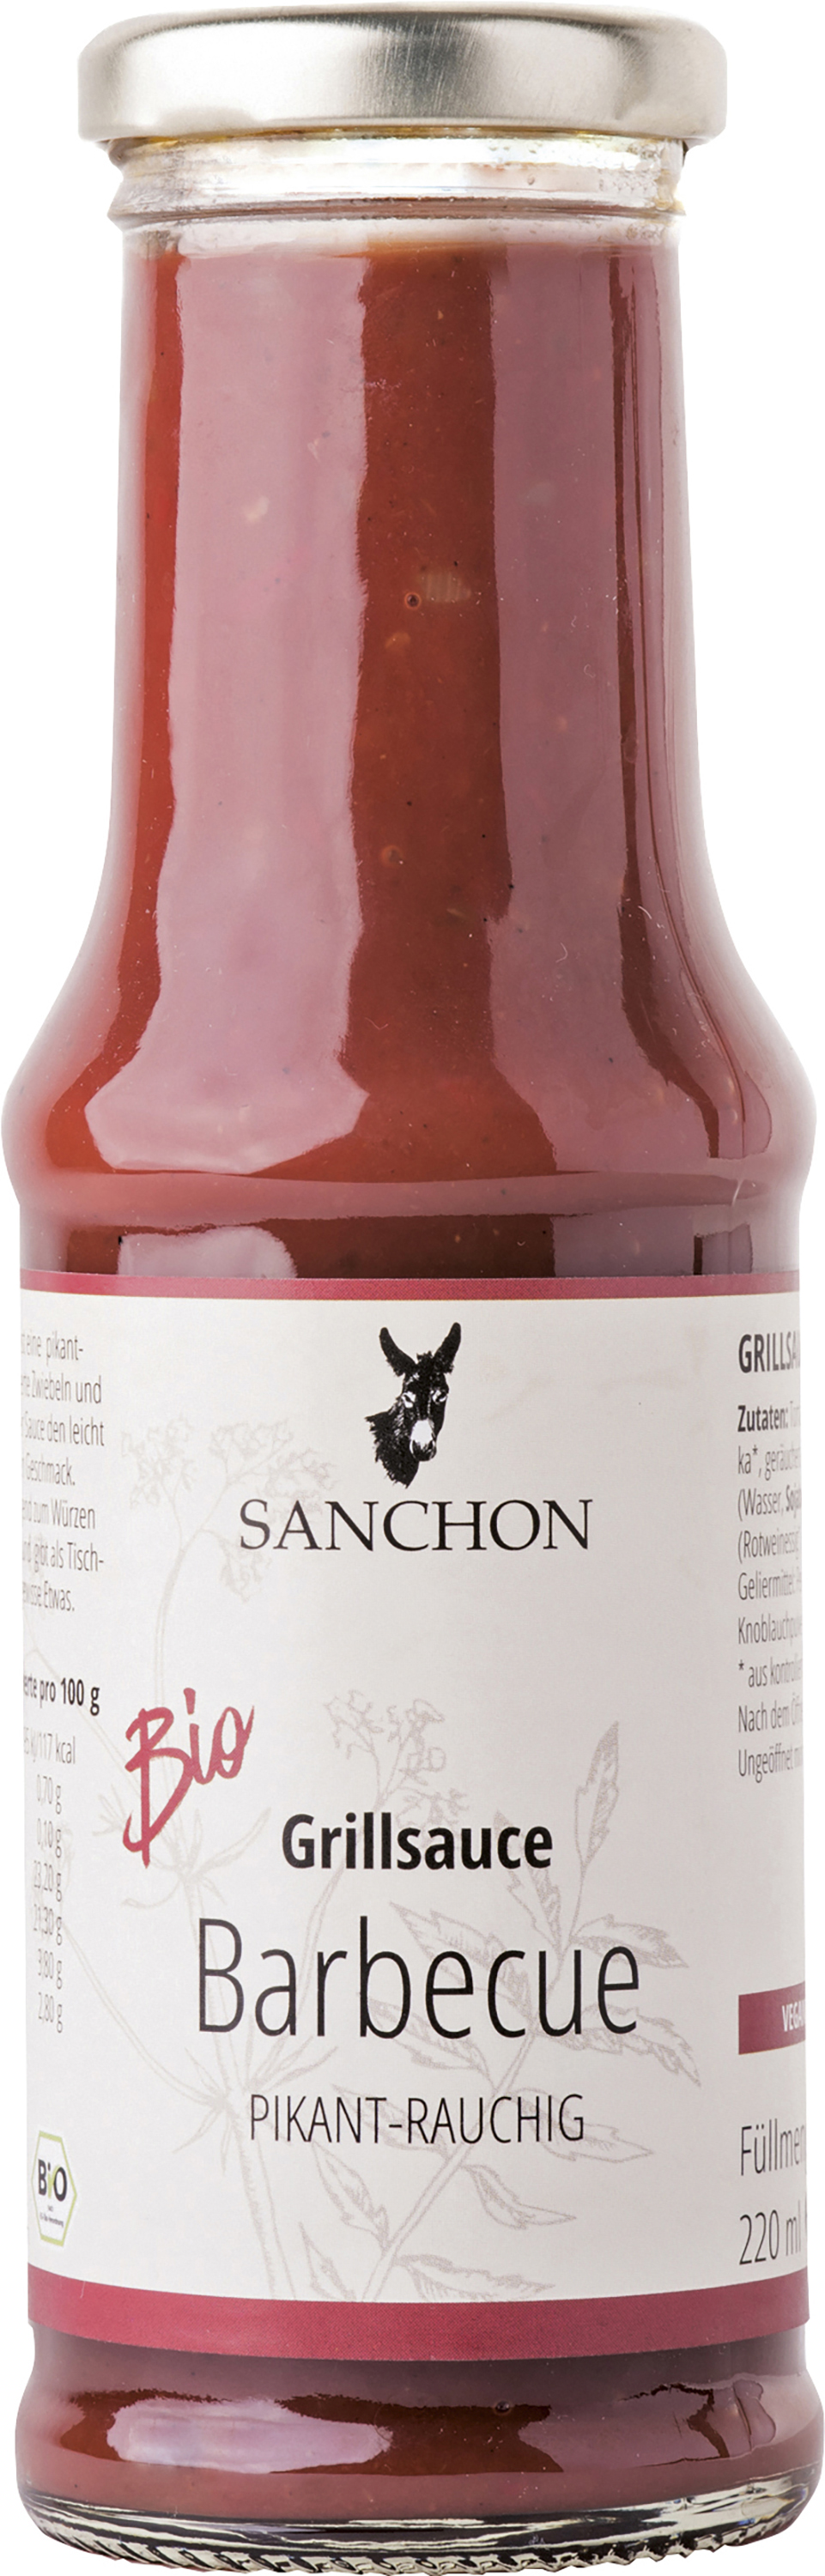 Barbecue, Grillsauce, 210ml